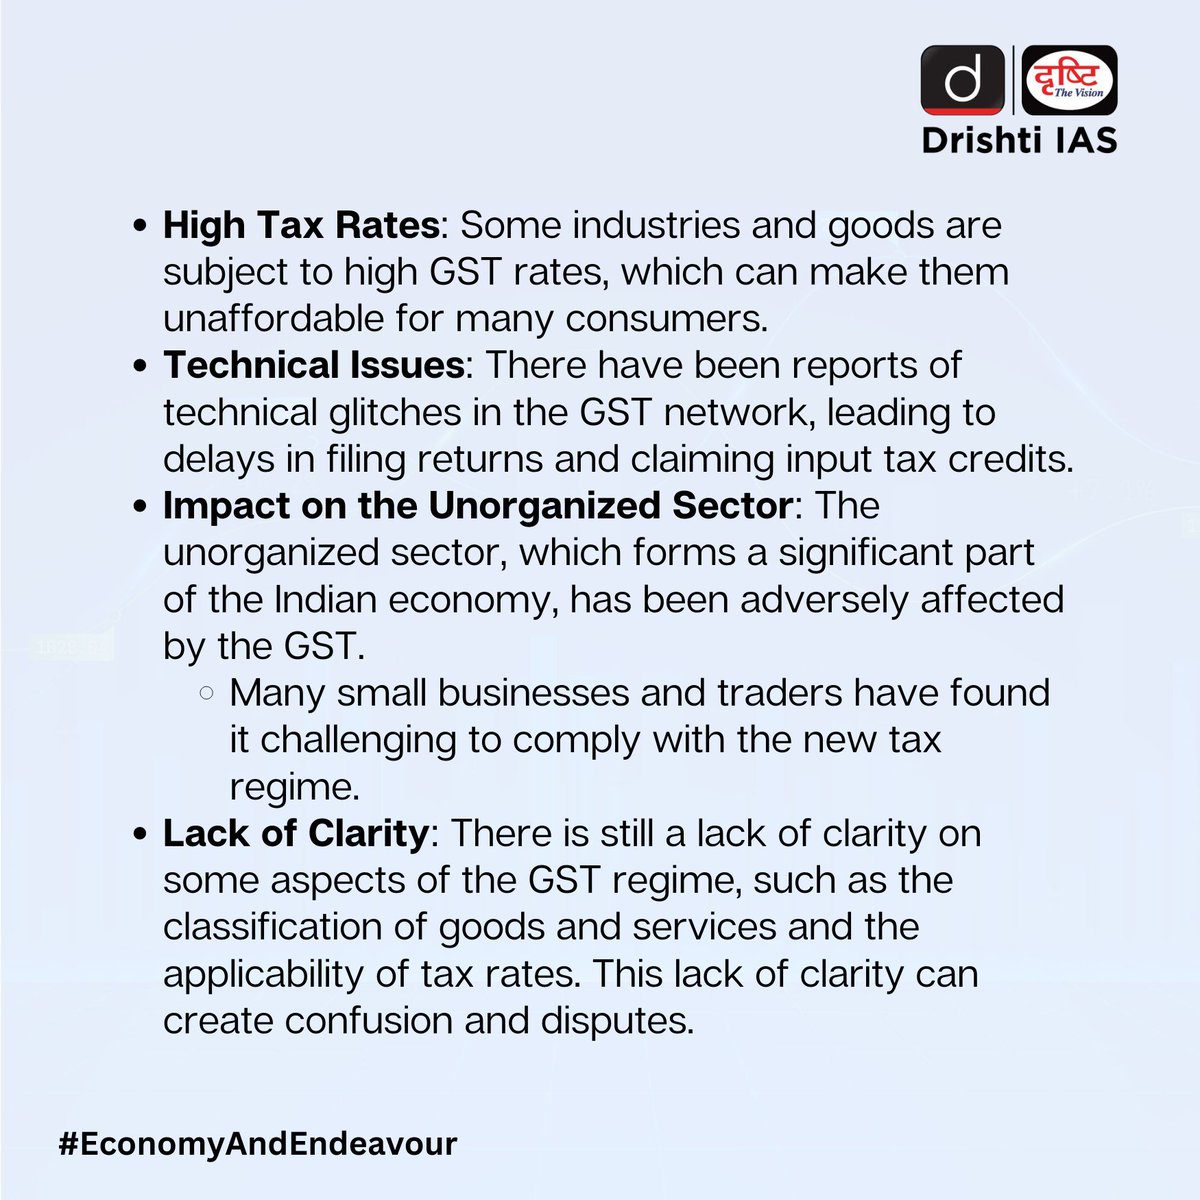 Economics is as much about human resources and development as about capital, market and finance. Hone your reasoning skills by learning more about #EconomyAndEndeavour! 
 
#DrishtiGuideToGS #Economy #IndianEconomy #GST #Tax #UPSC #IAS #CSE #PCS #DrishtiIAS #DrishtiIASEnglish